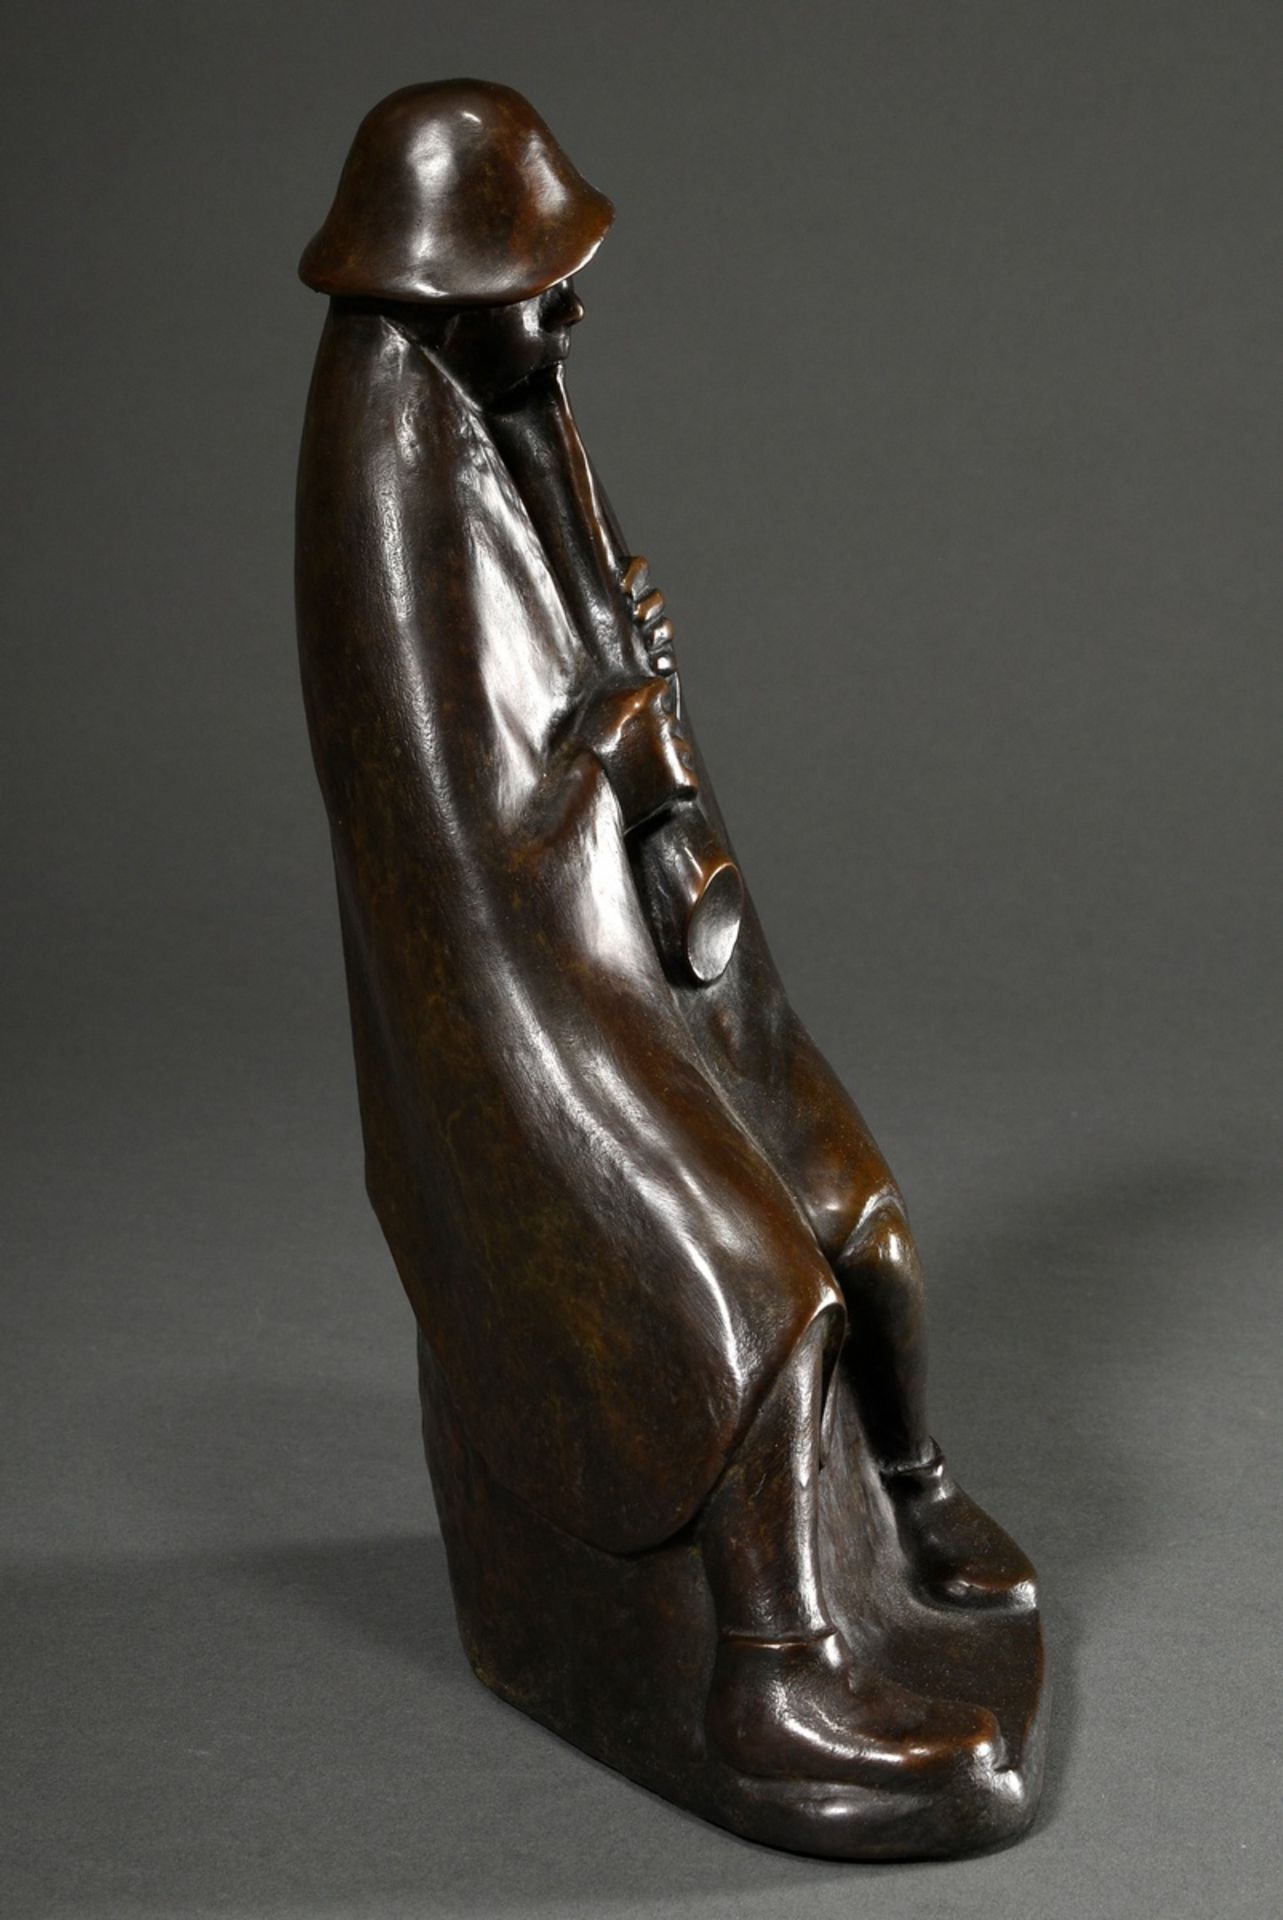 Barlach, Ernst (1870-1938) "The Flute Player" 1936, patinated bronze, 119/980, b. sign/num., posthu - Image 2 of 6